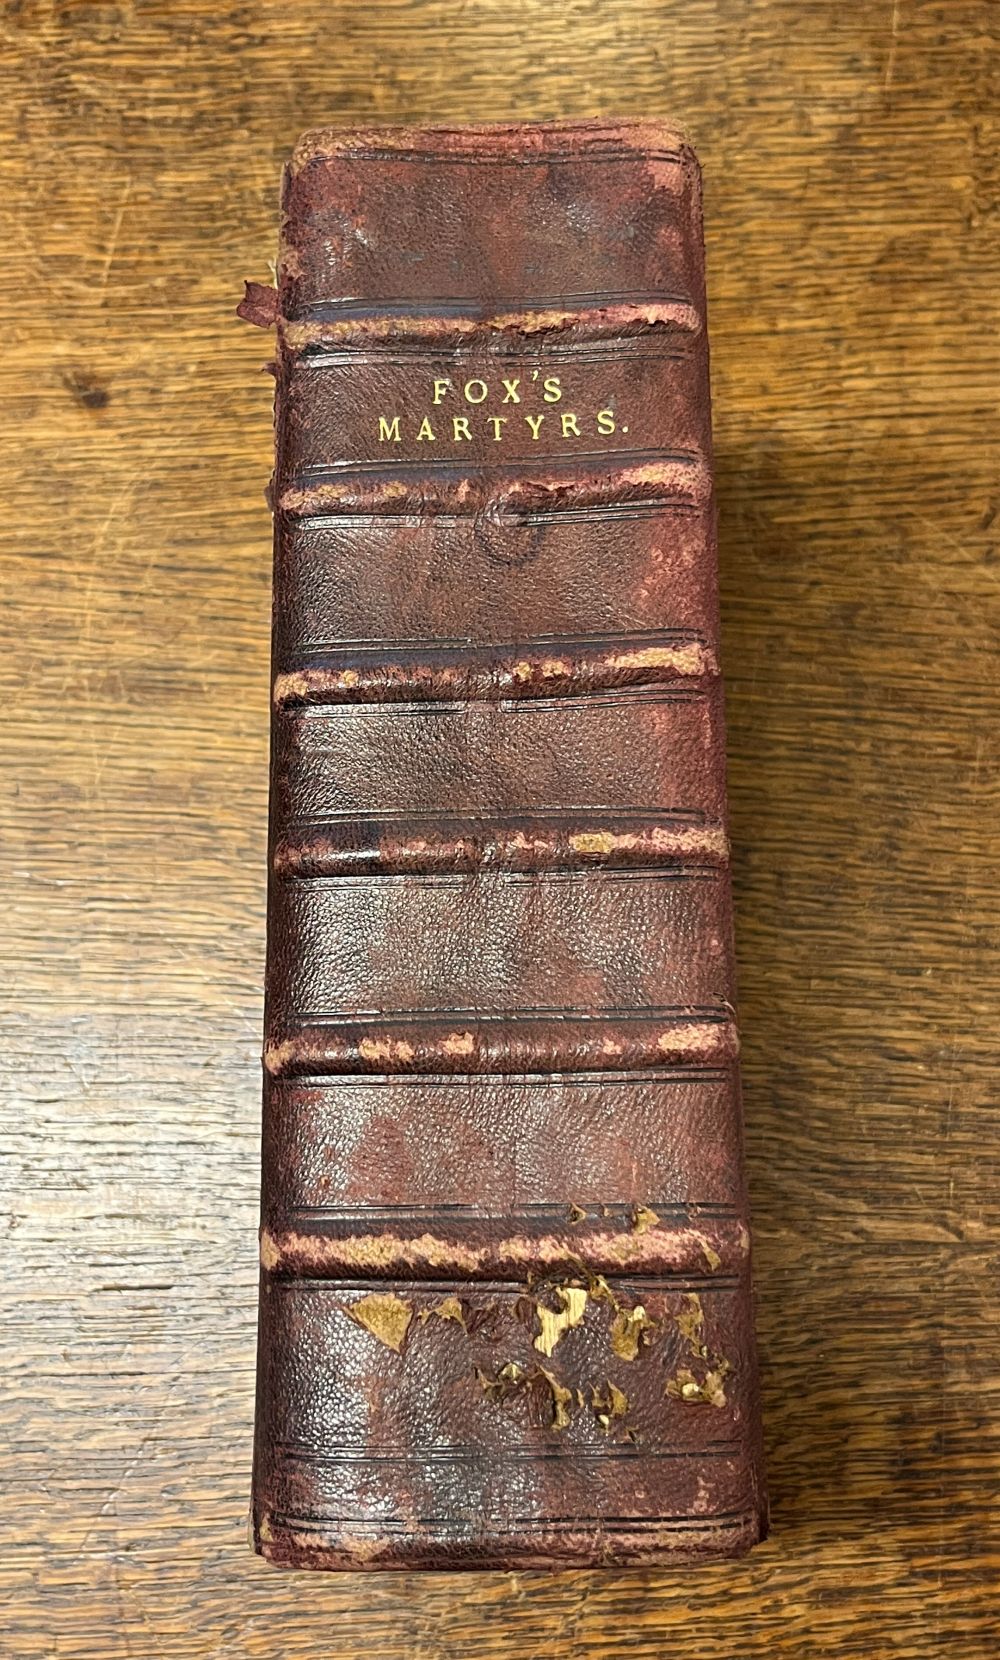 Foxe, John, Book of Martyrs, 2 volumes in one, 3rd edition, John Daye, 1576 - Image 3 of 9